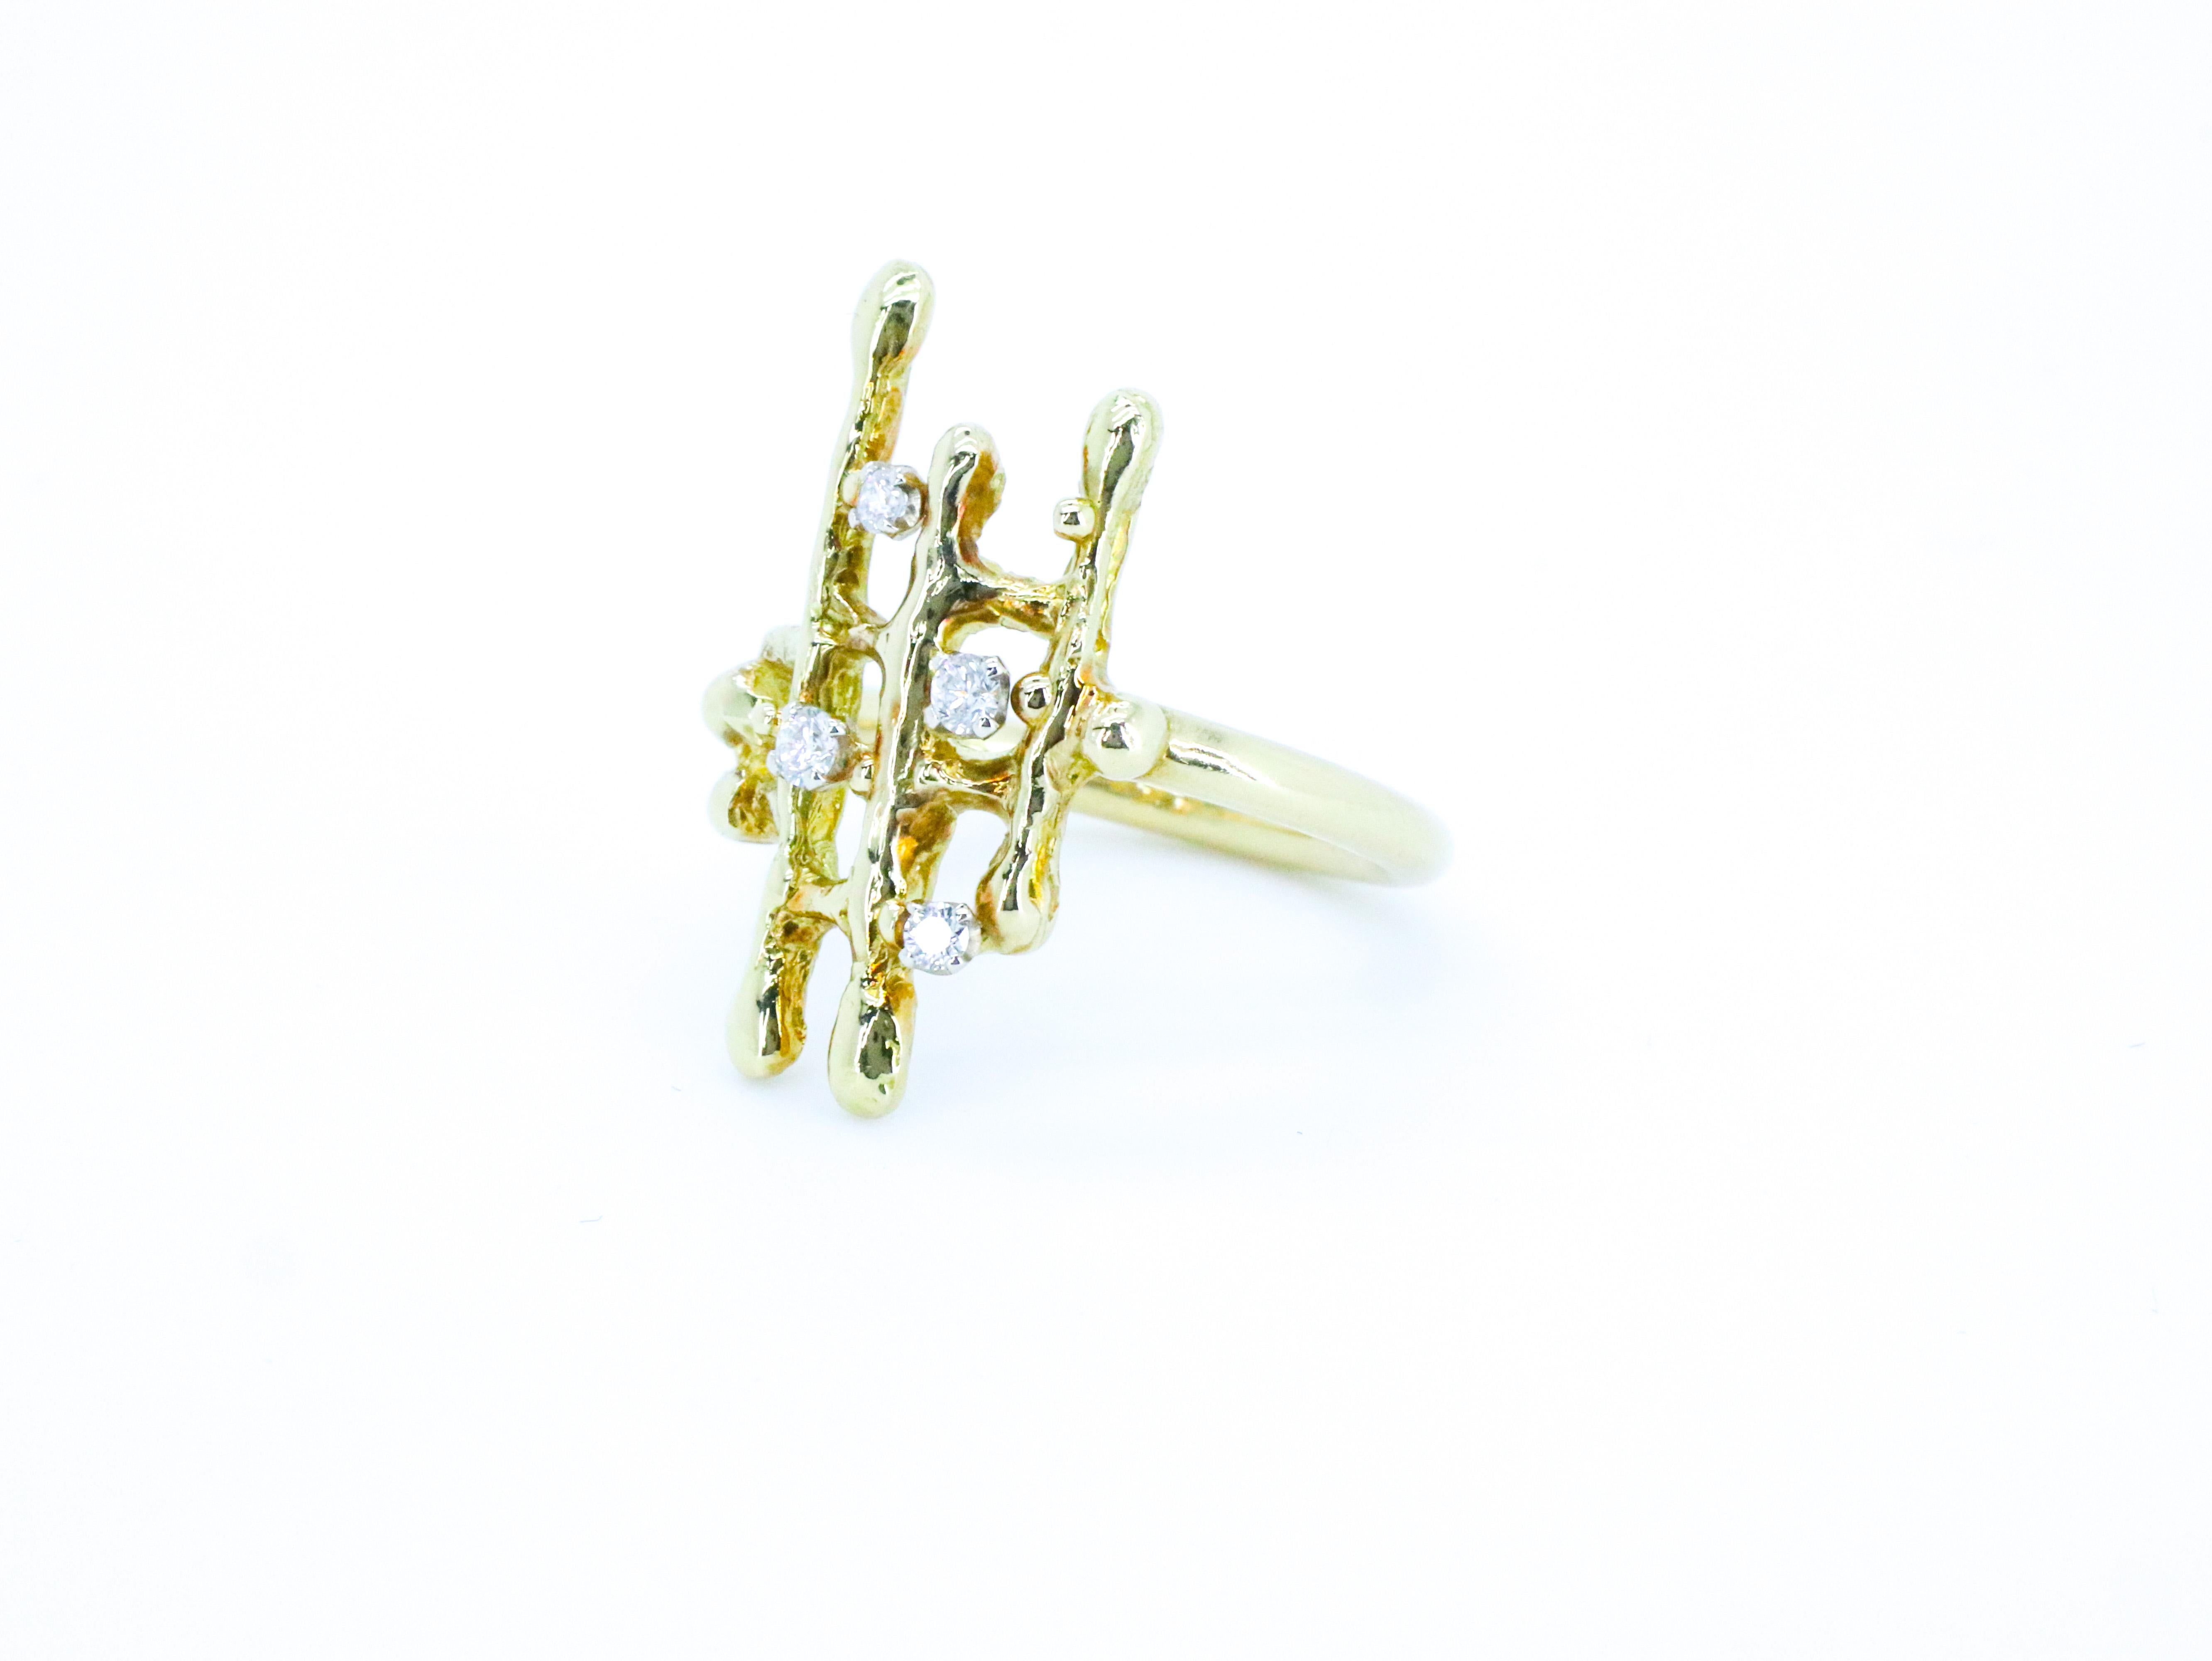 For Sale:  18K Yellow Gold Made in Italy Textured Grounding Diamond Cocktail Ring. 4